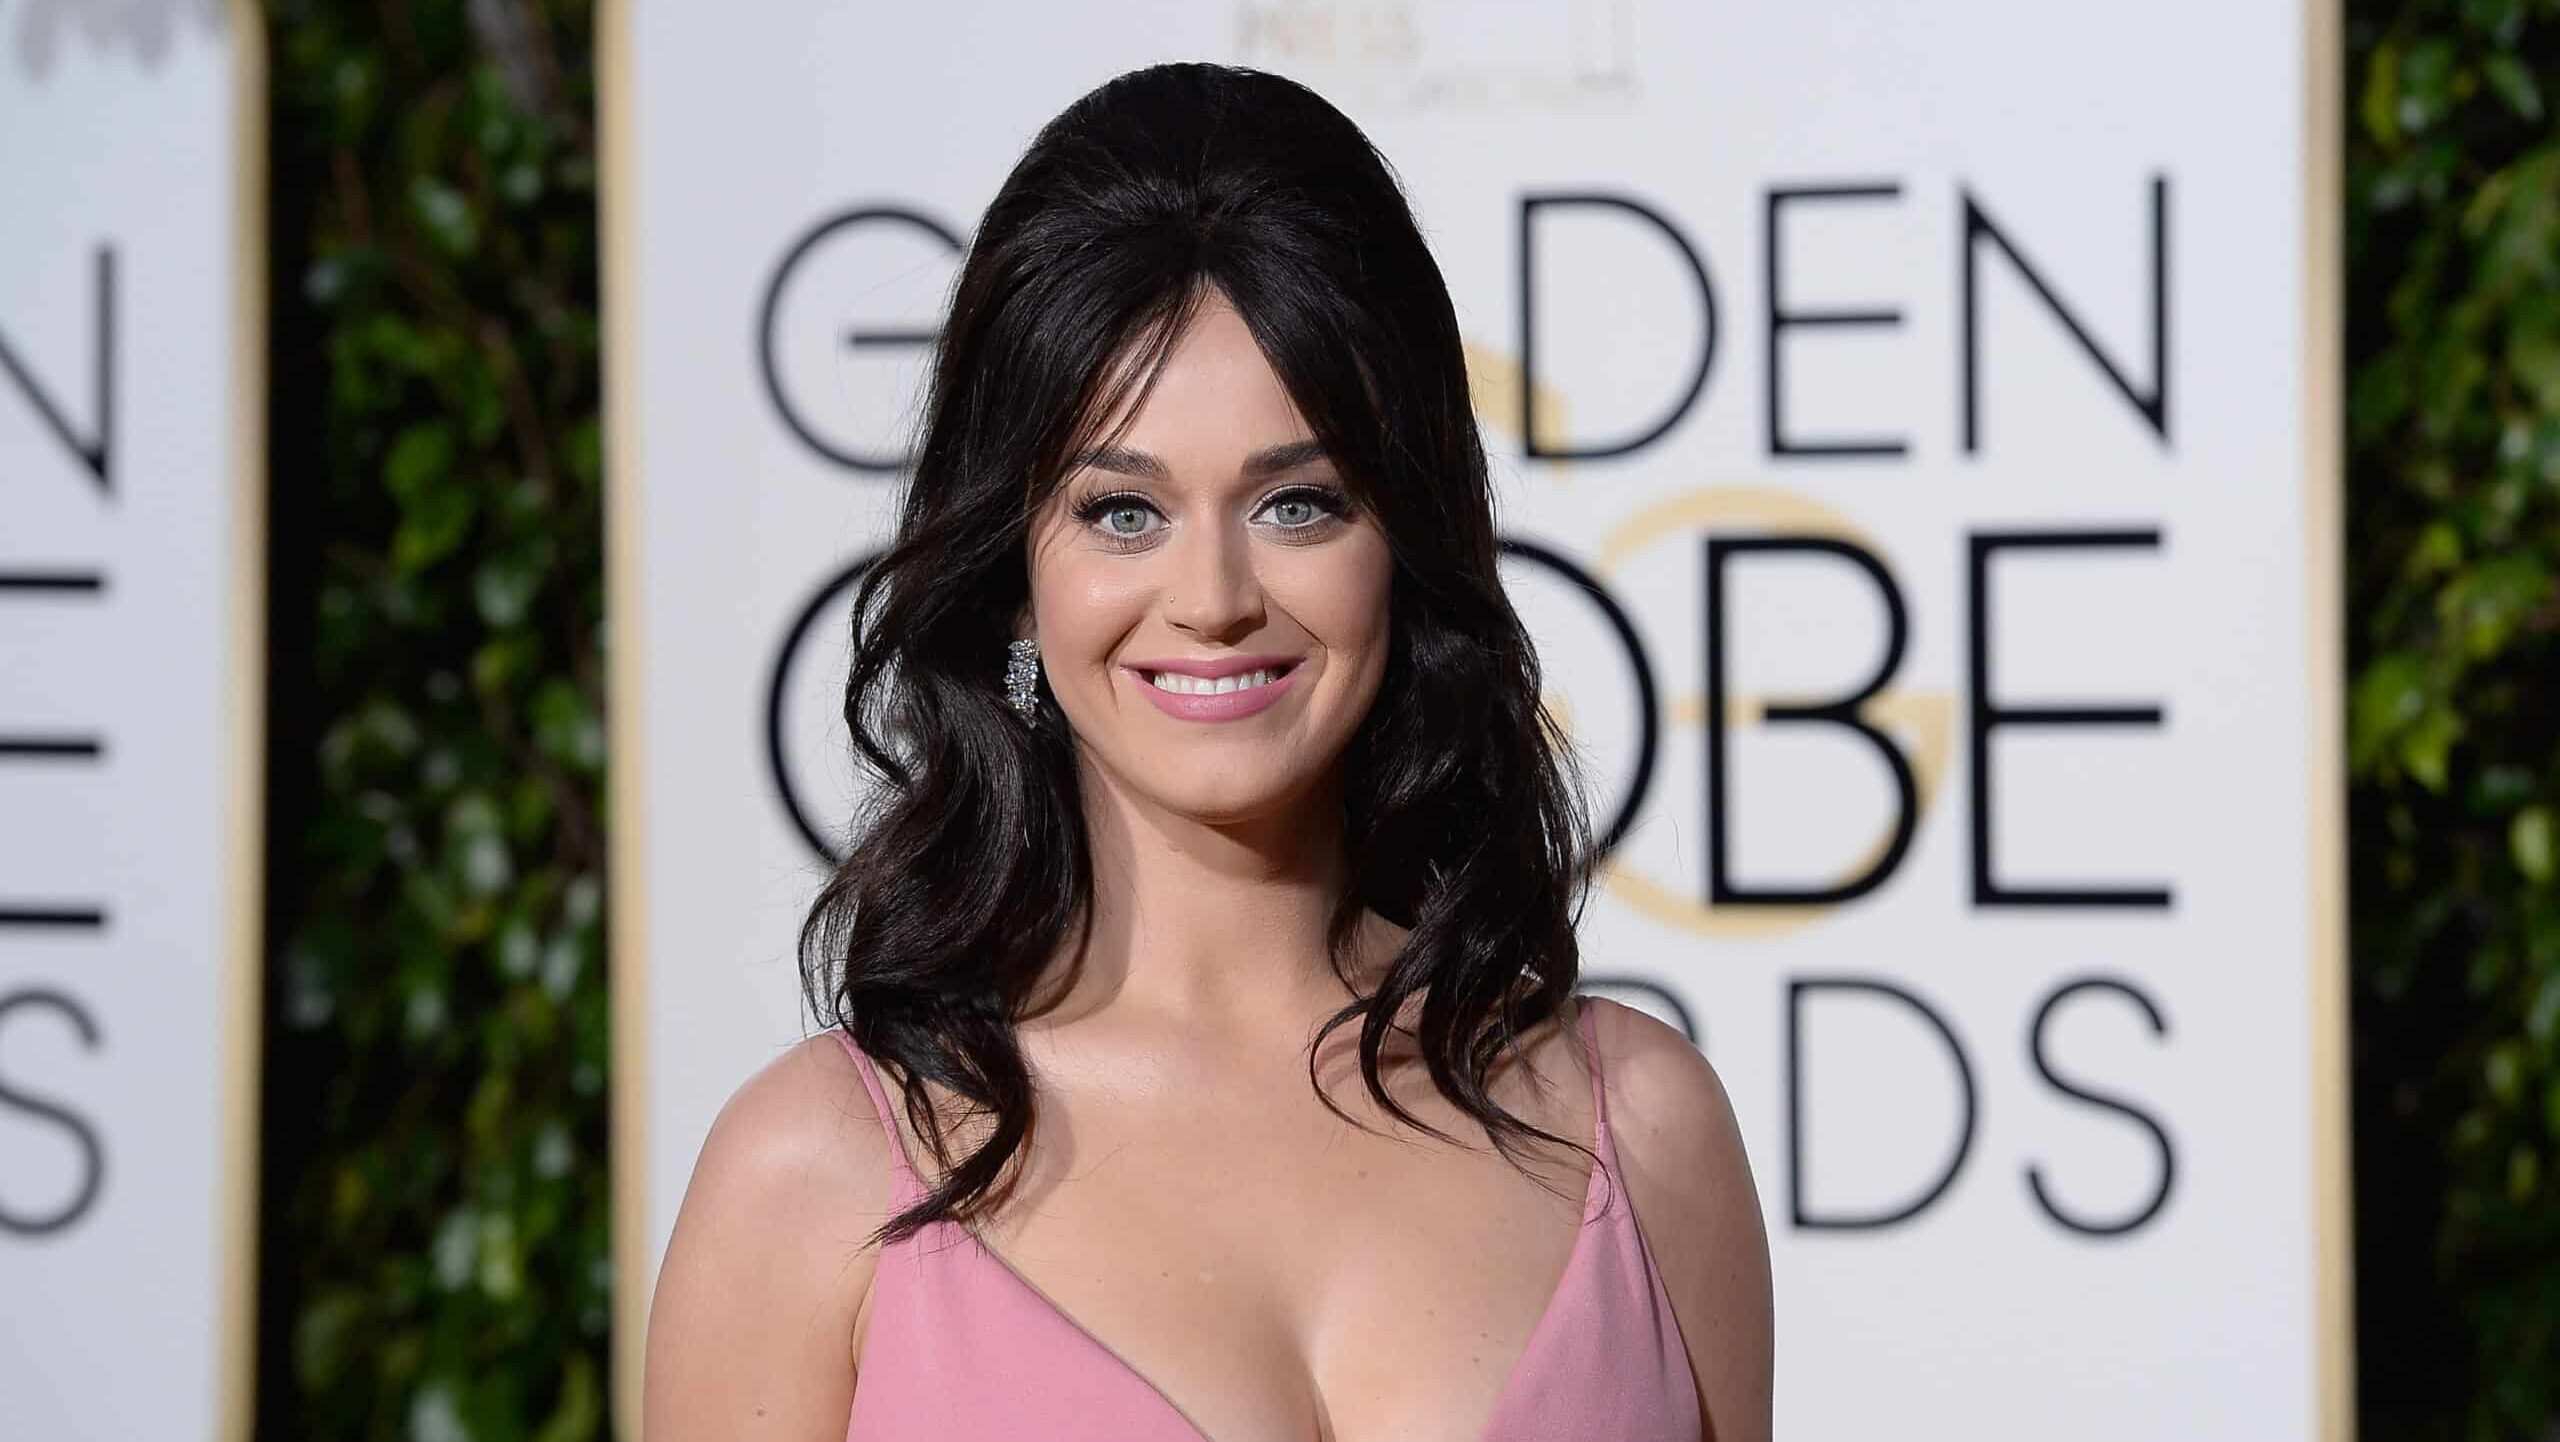 73rd ANNUAL GOLDEN GLOBE AWARDS -- Pictured: Recording artist Katy Perry arrives to the 73rd Annual Golden Globe Awards held at the Beverly Hilton Hotel on January 10, 2016.